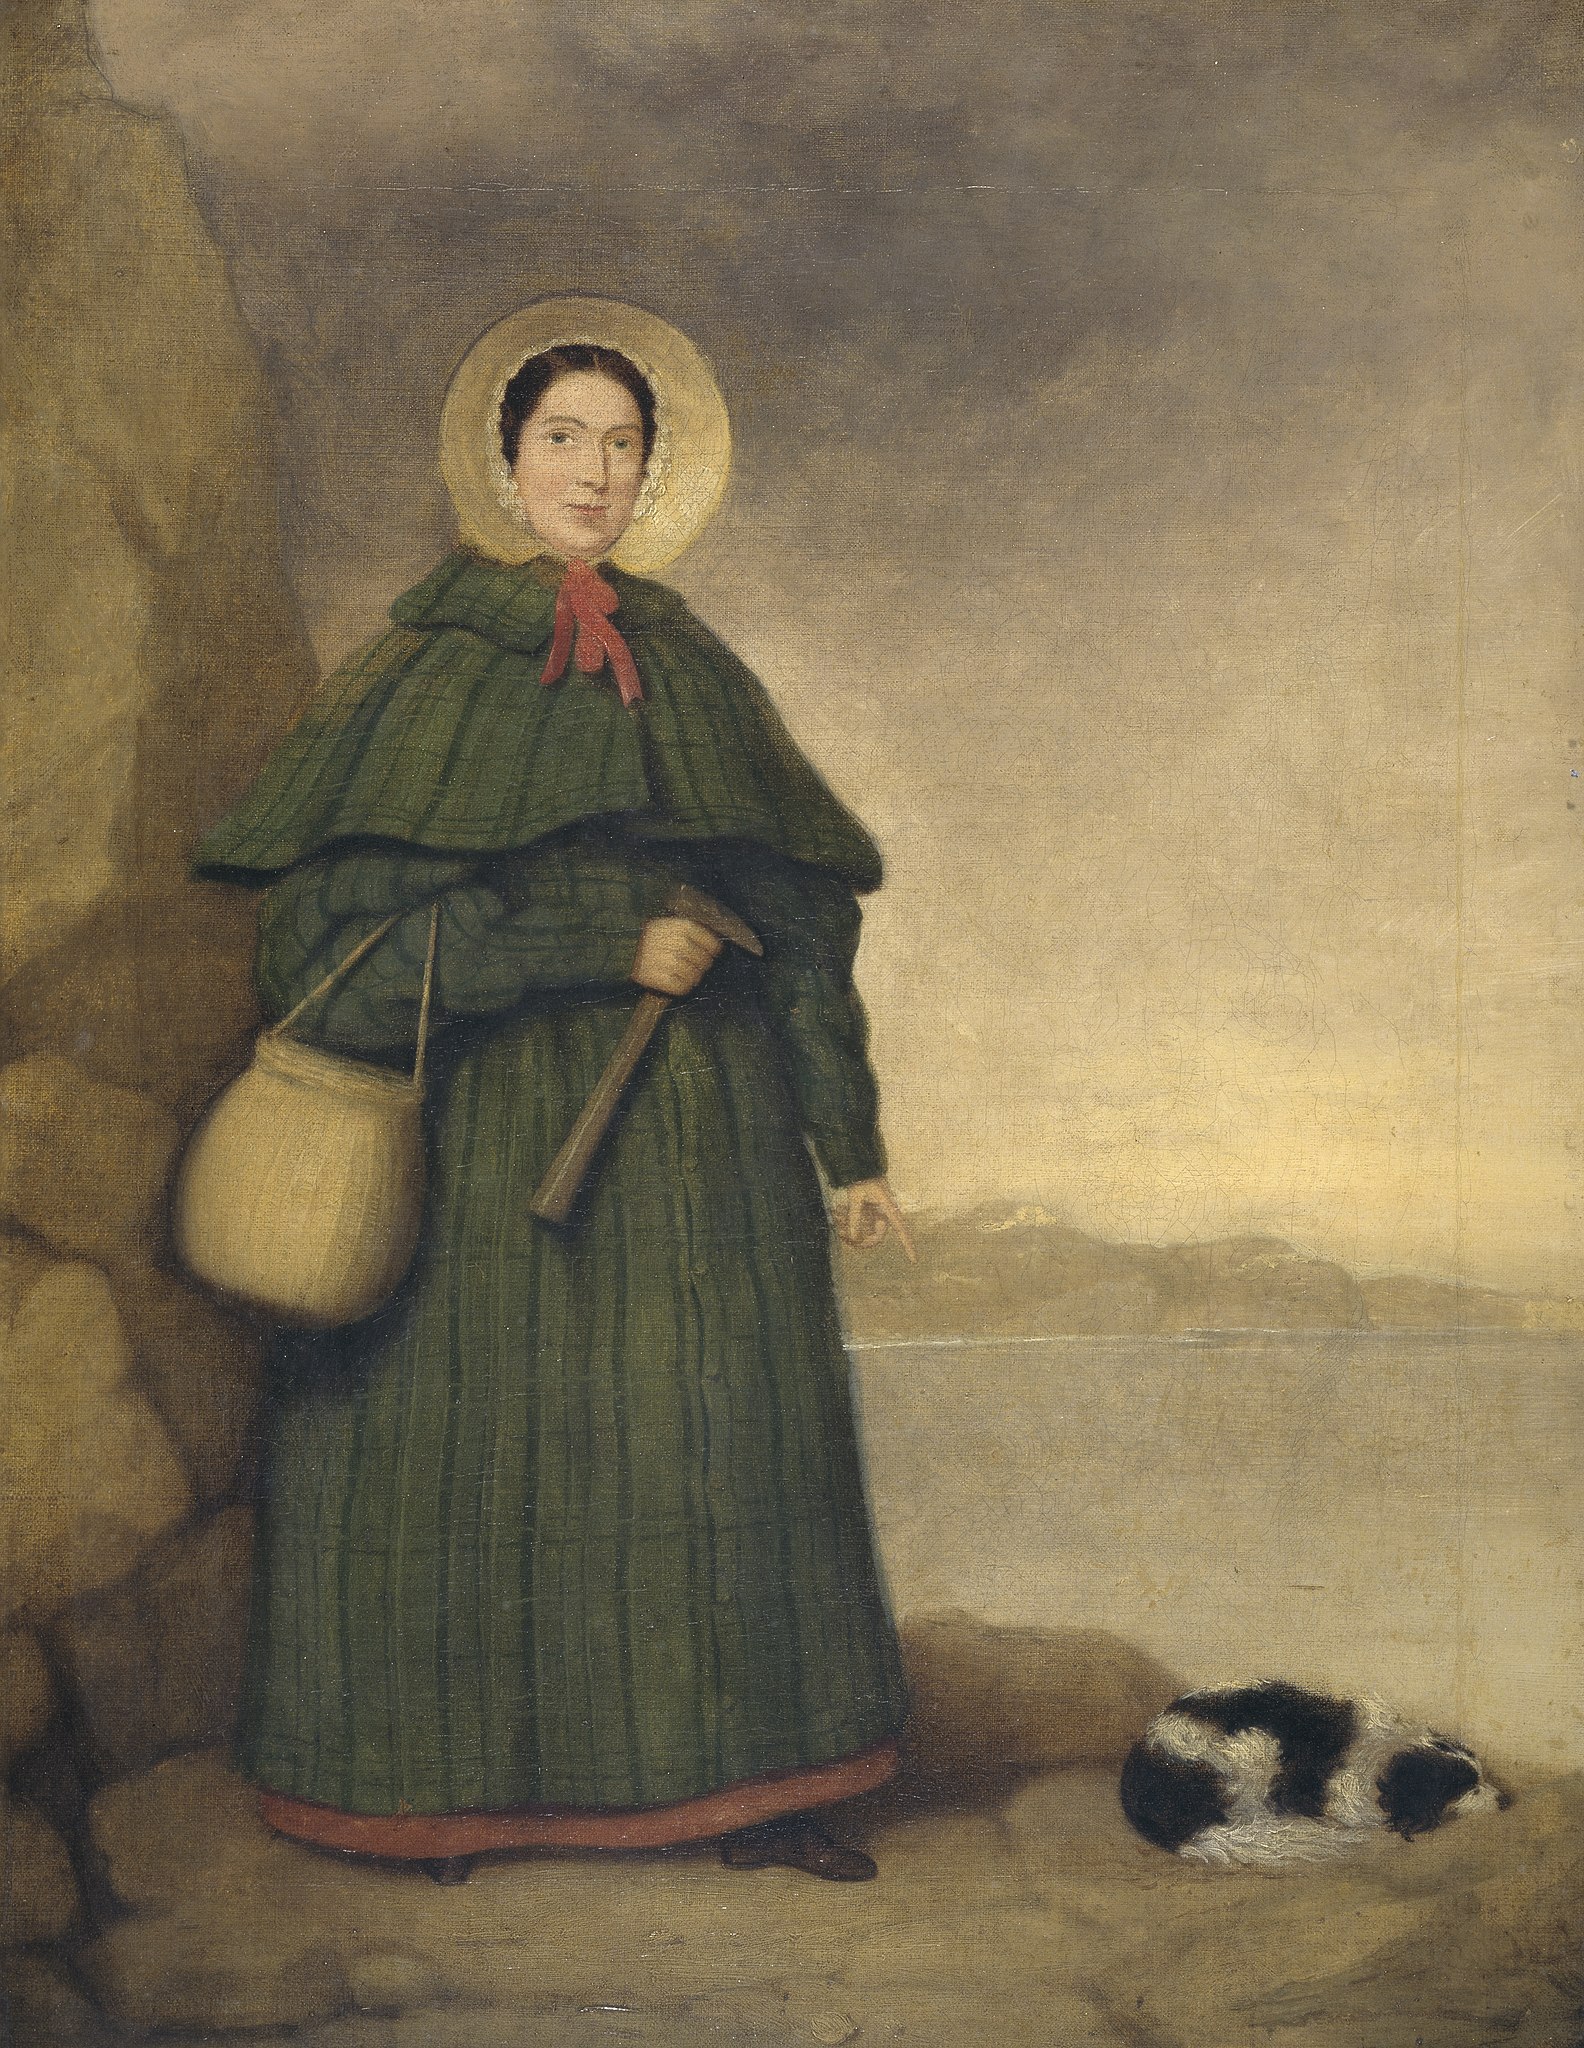 Pioneering paleontologist and collector Mary Anning